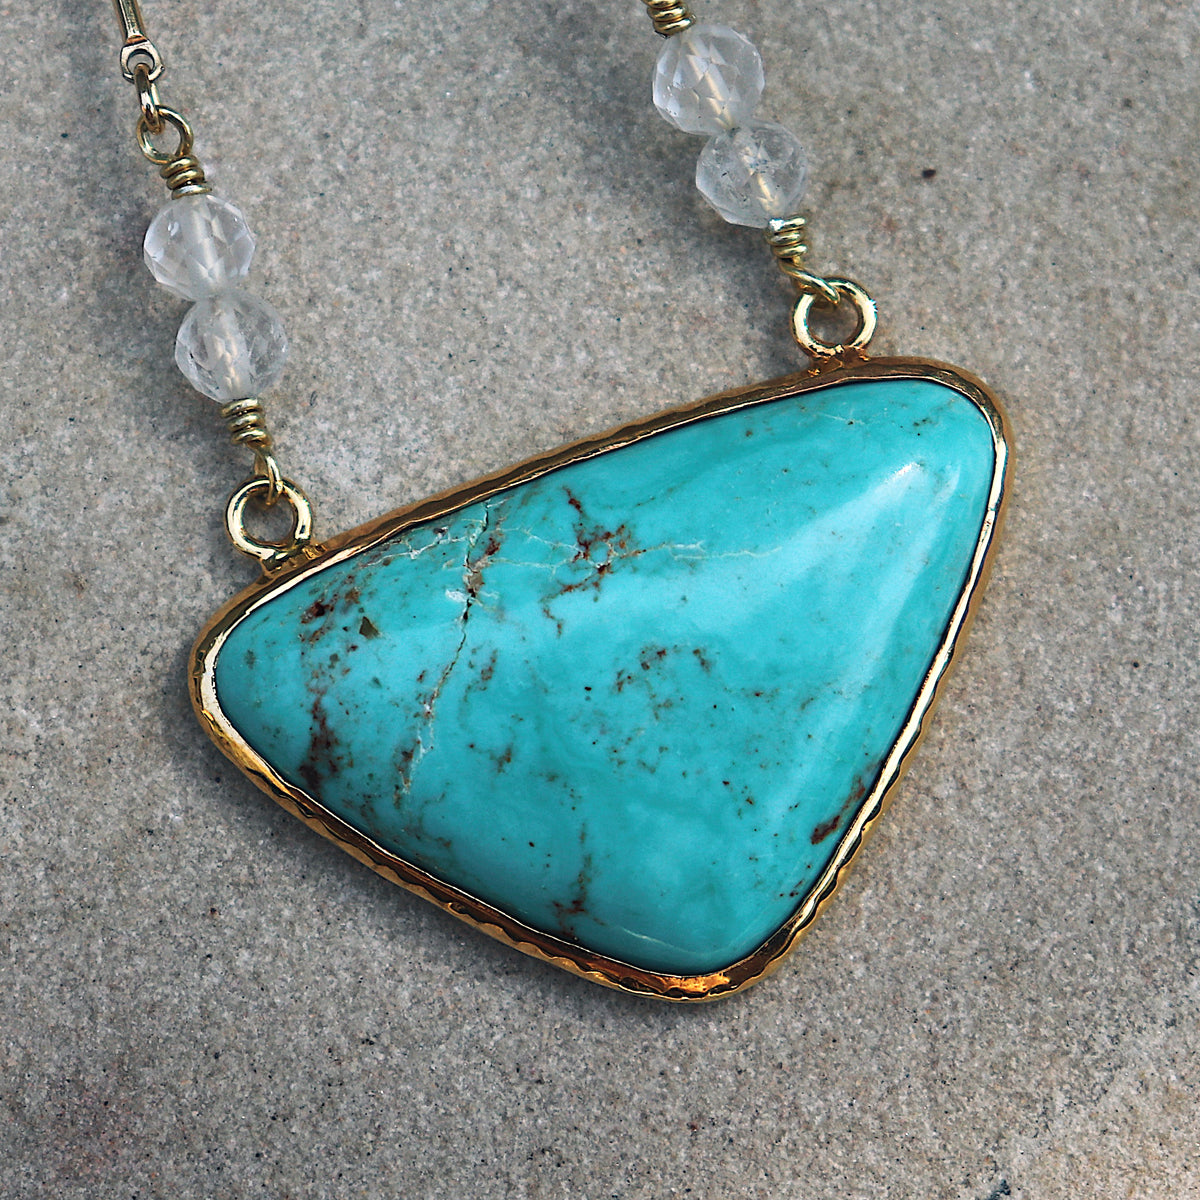 Castle Dome Turquoise Necklace